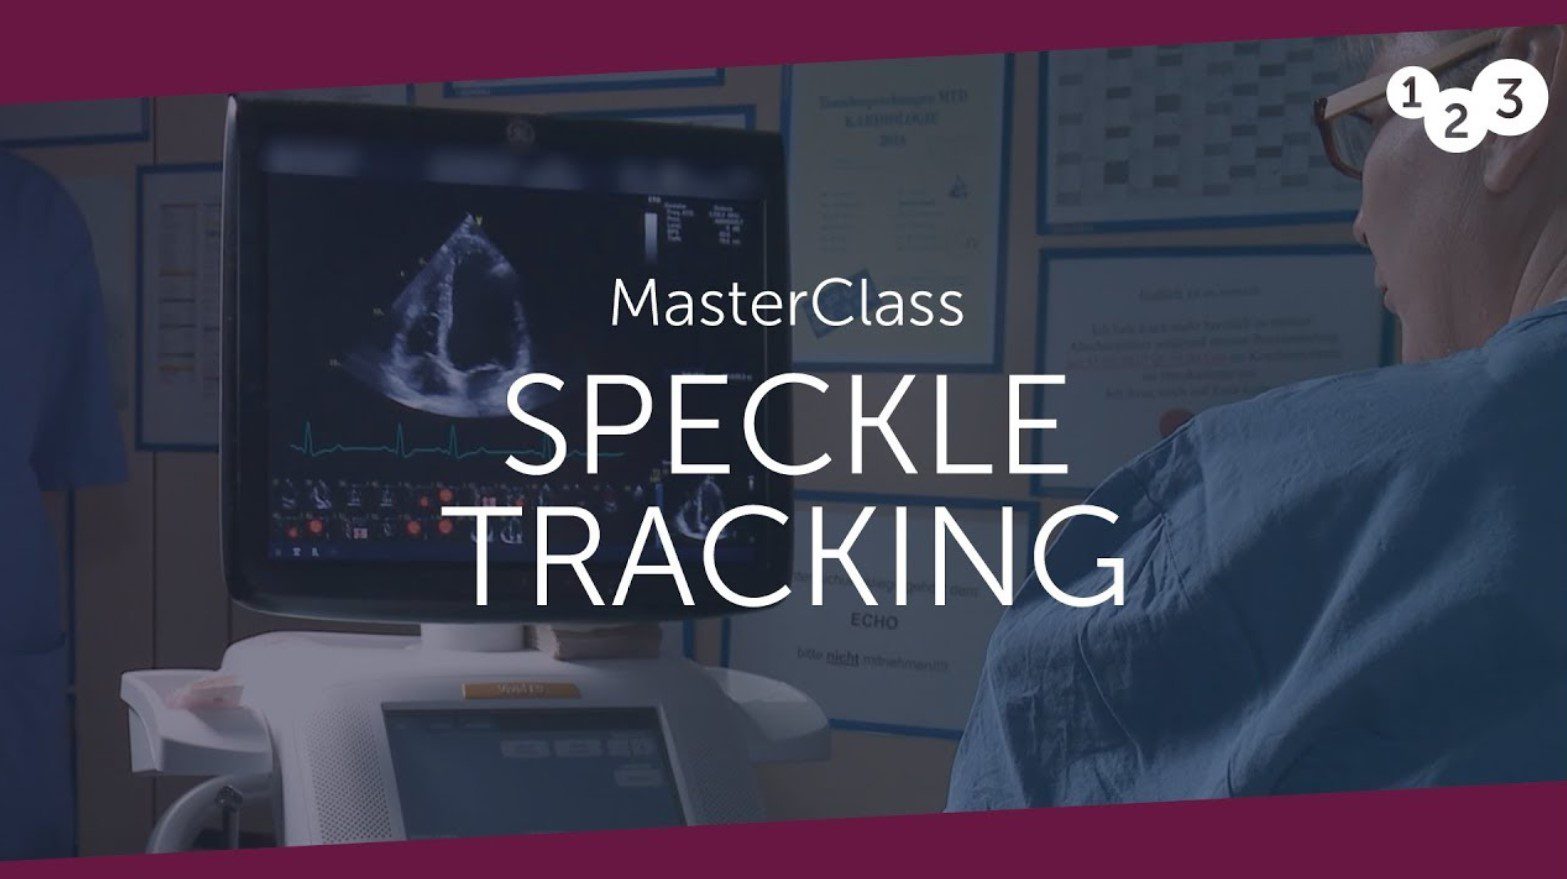 123sonography Speckle Tracking MasterClass 2020 Free Download